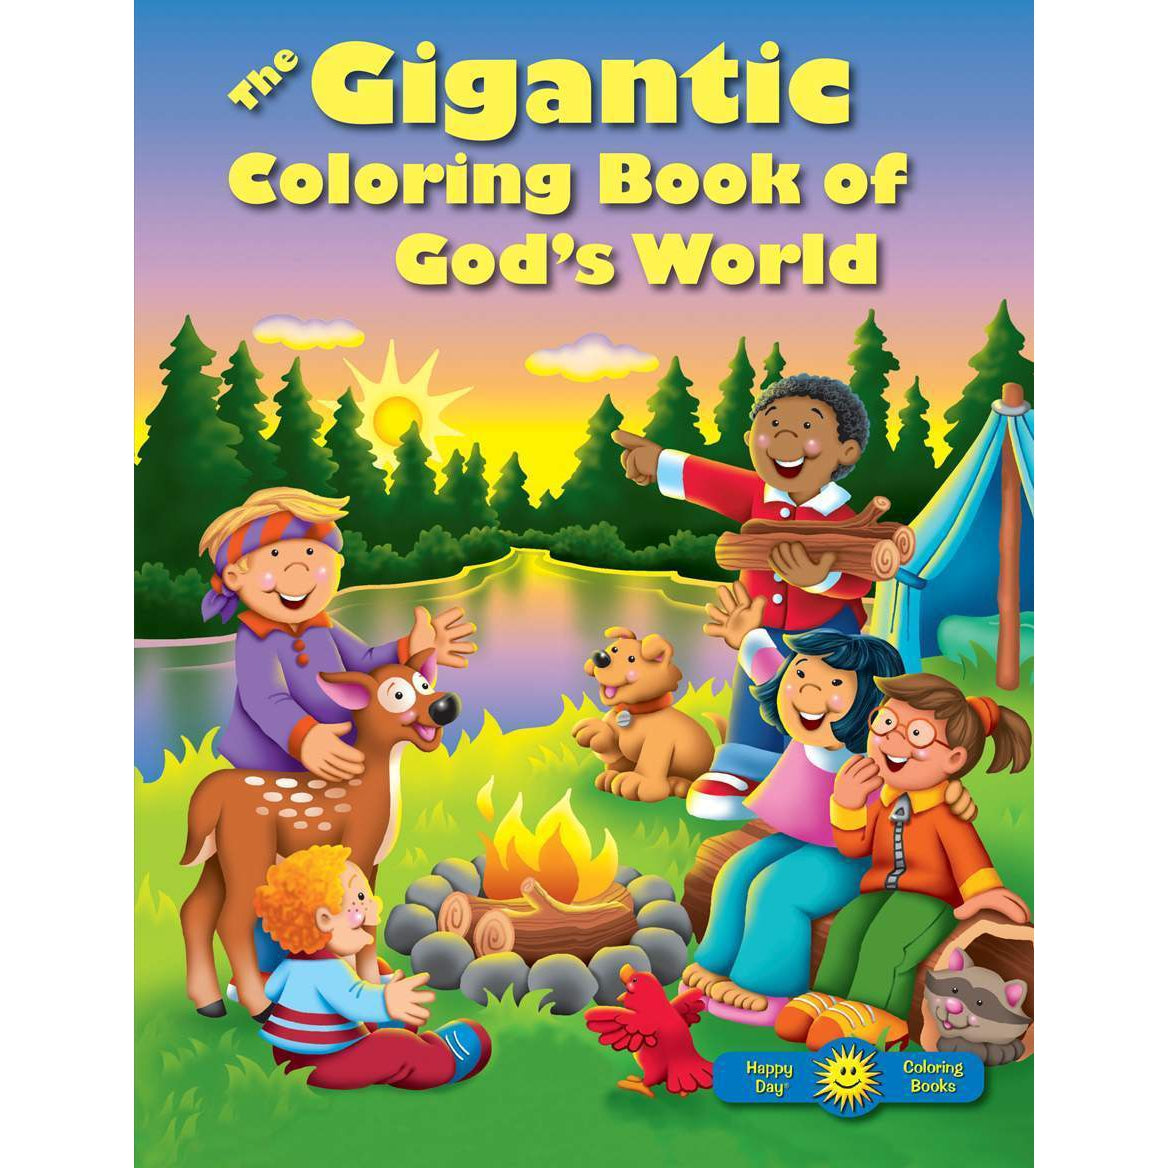 The Gigantic Coloring Book of God's World [Book]